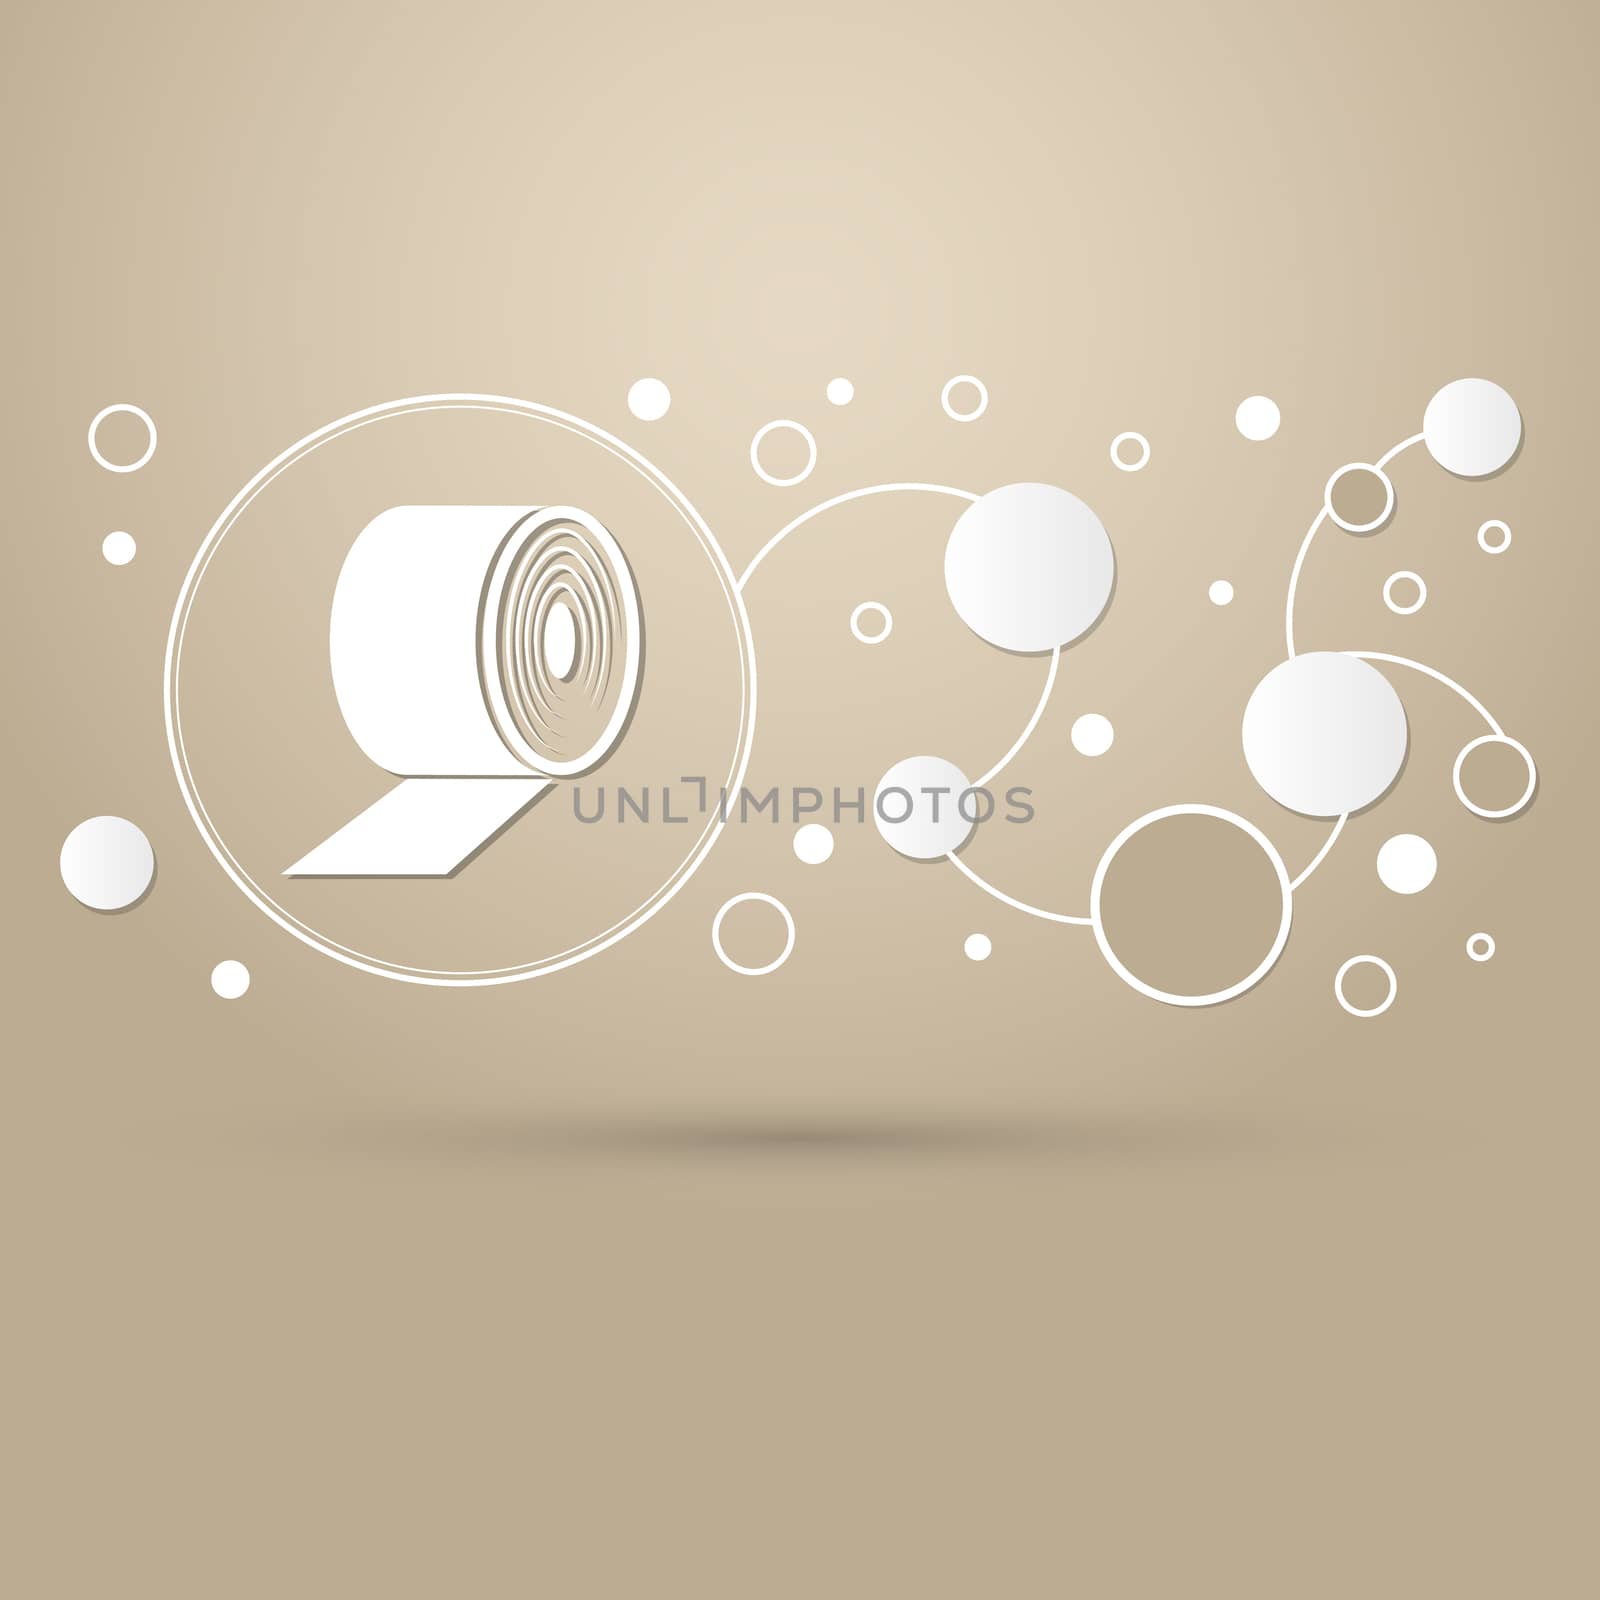 Toilet paper icon on a brown background with elegant style and modern design infographic.  by Adamchuk